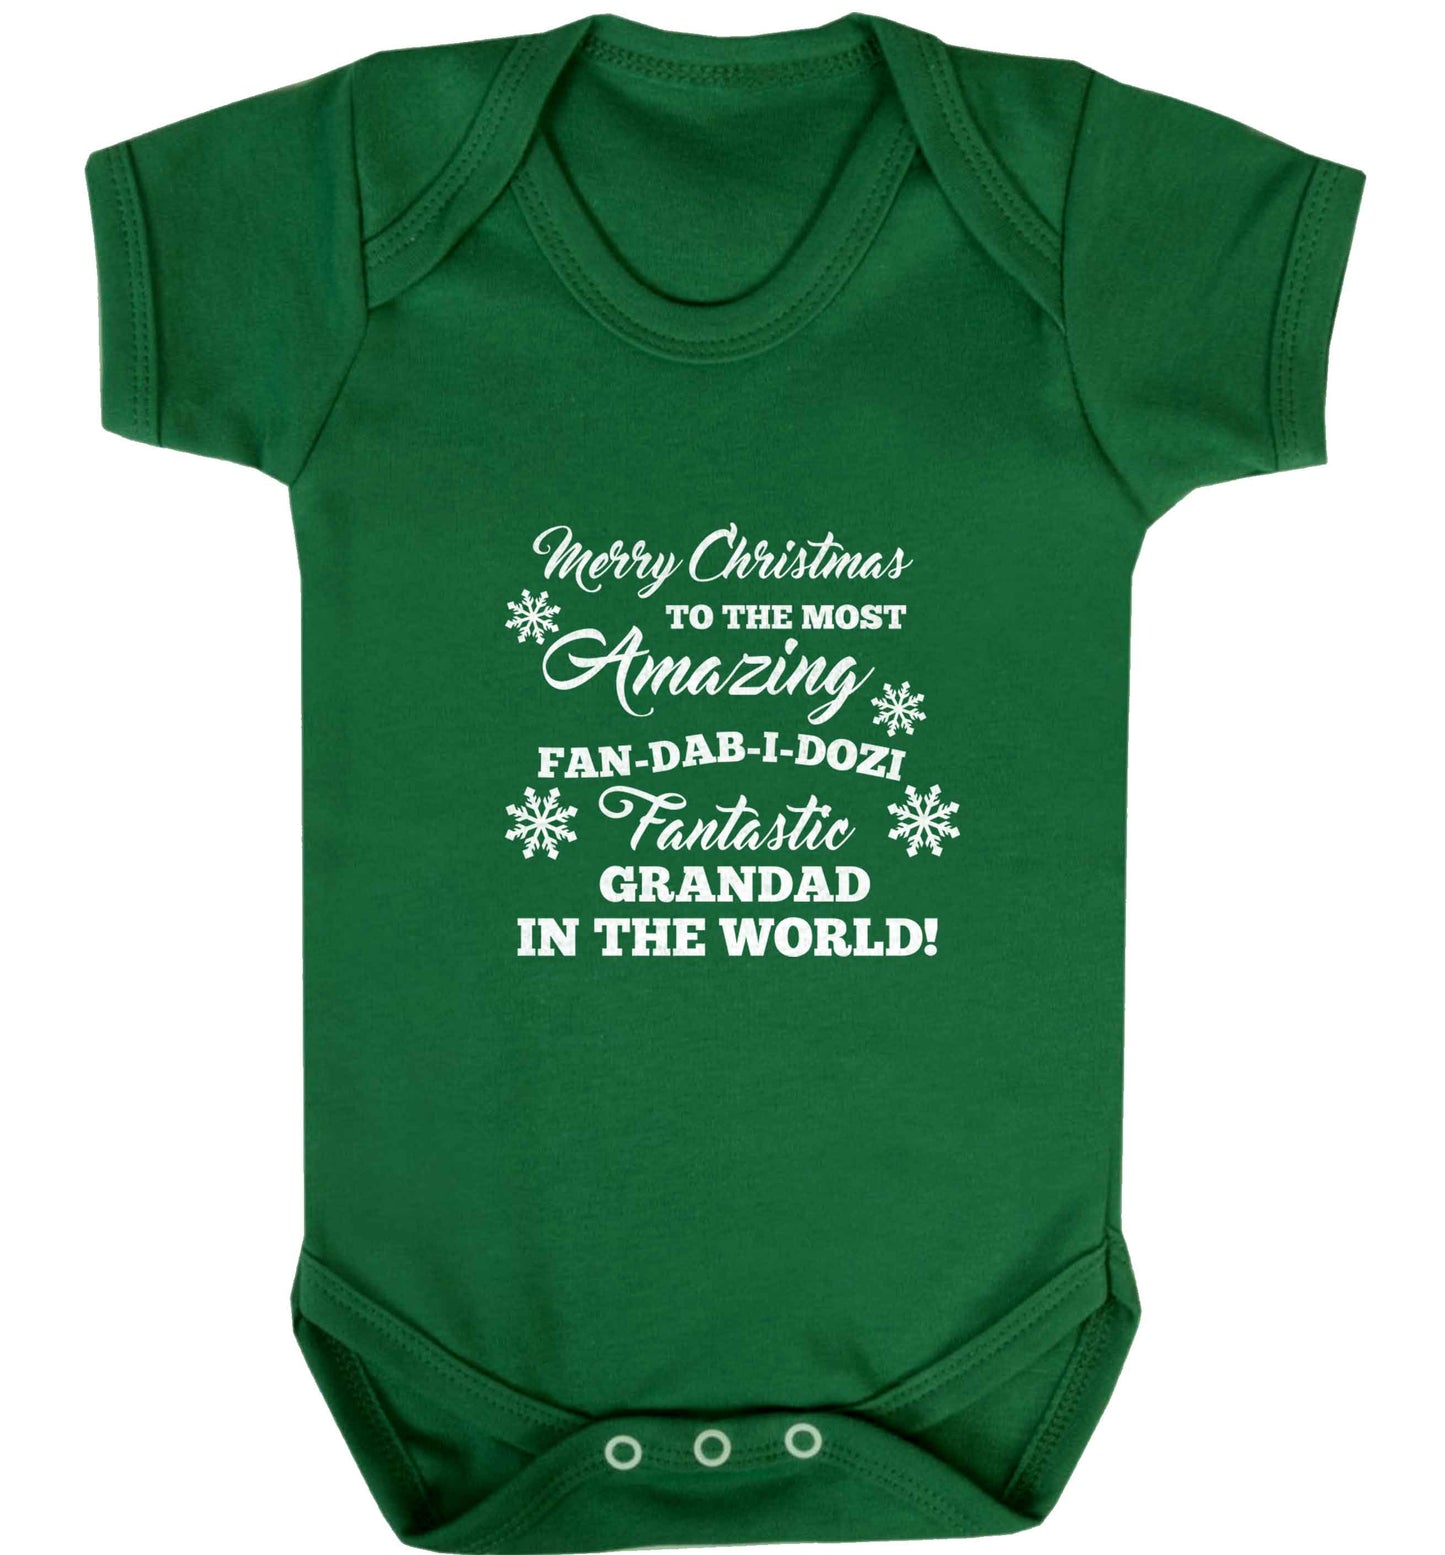 Merry Christmas to the most amazing fan-dab-i-dozi fantasic Grandad in the world baby vest green 18-24 months